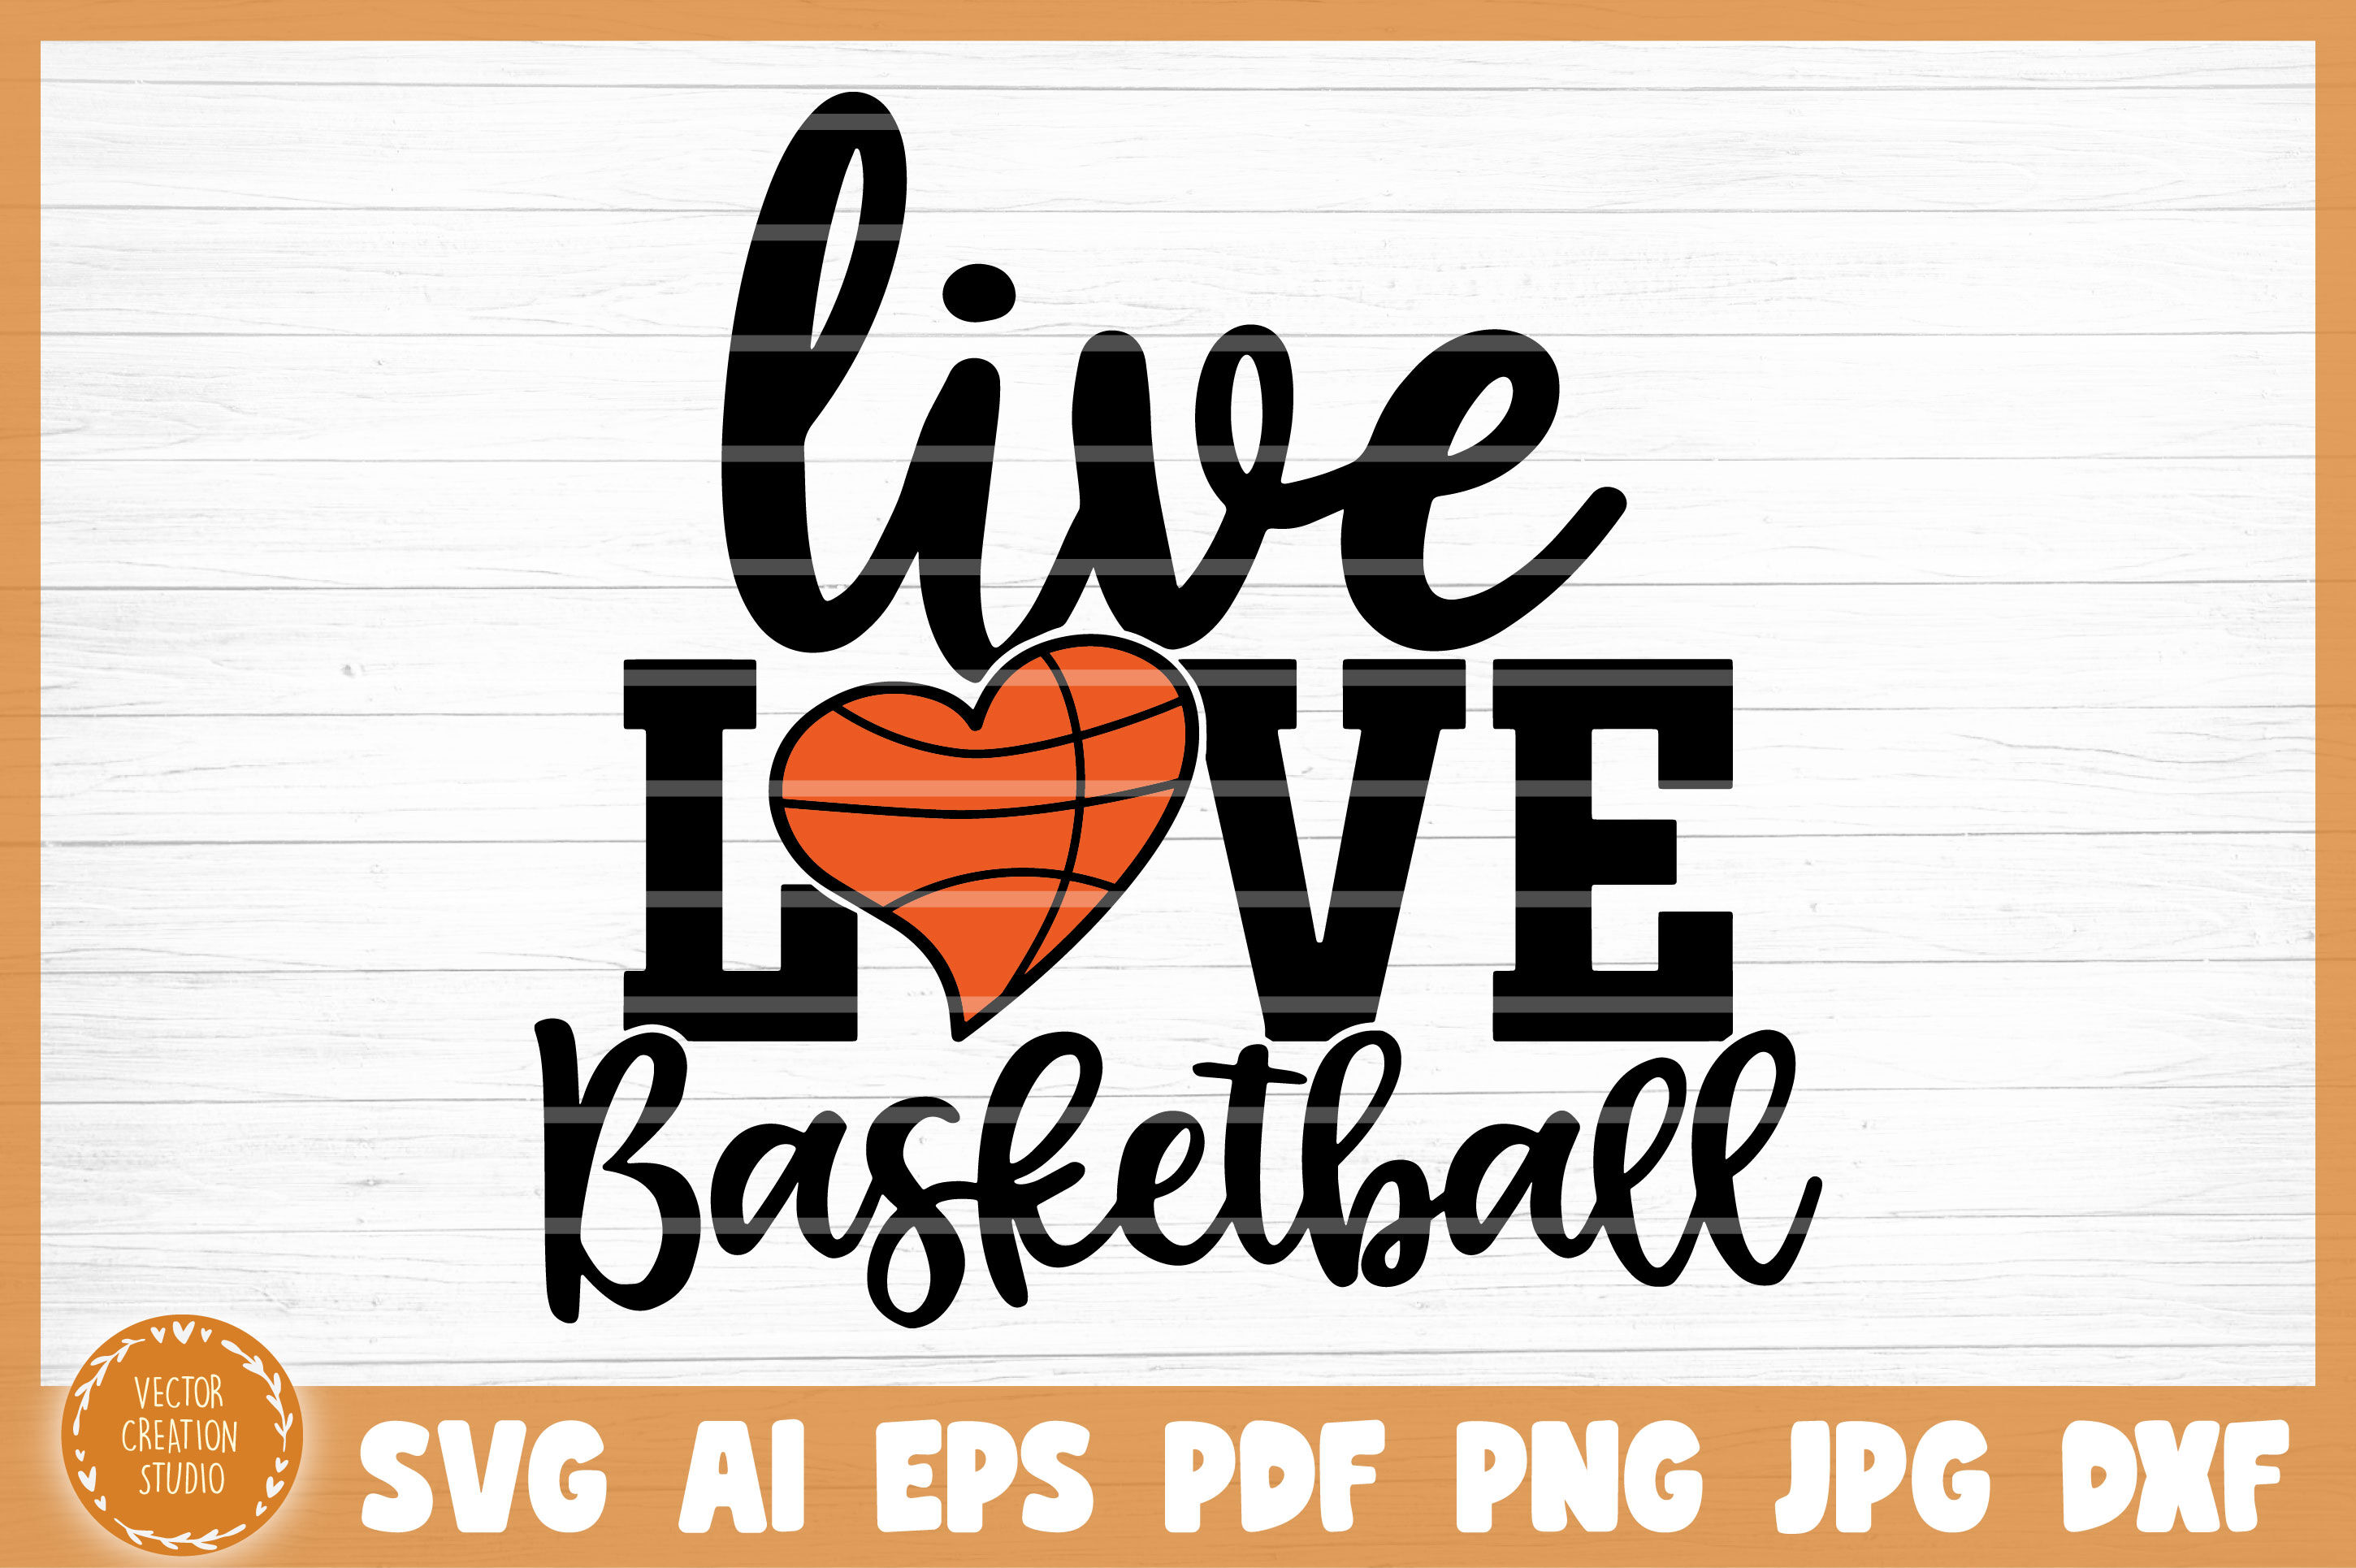 Live Love Basketball SVG Cut File By VectorCreationStudio TheHungryJPEG